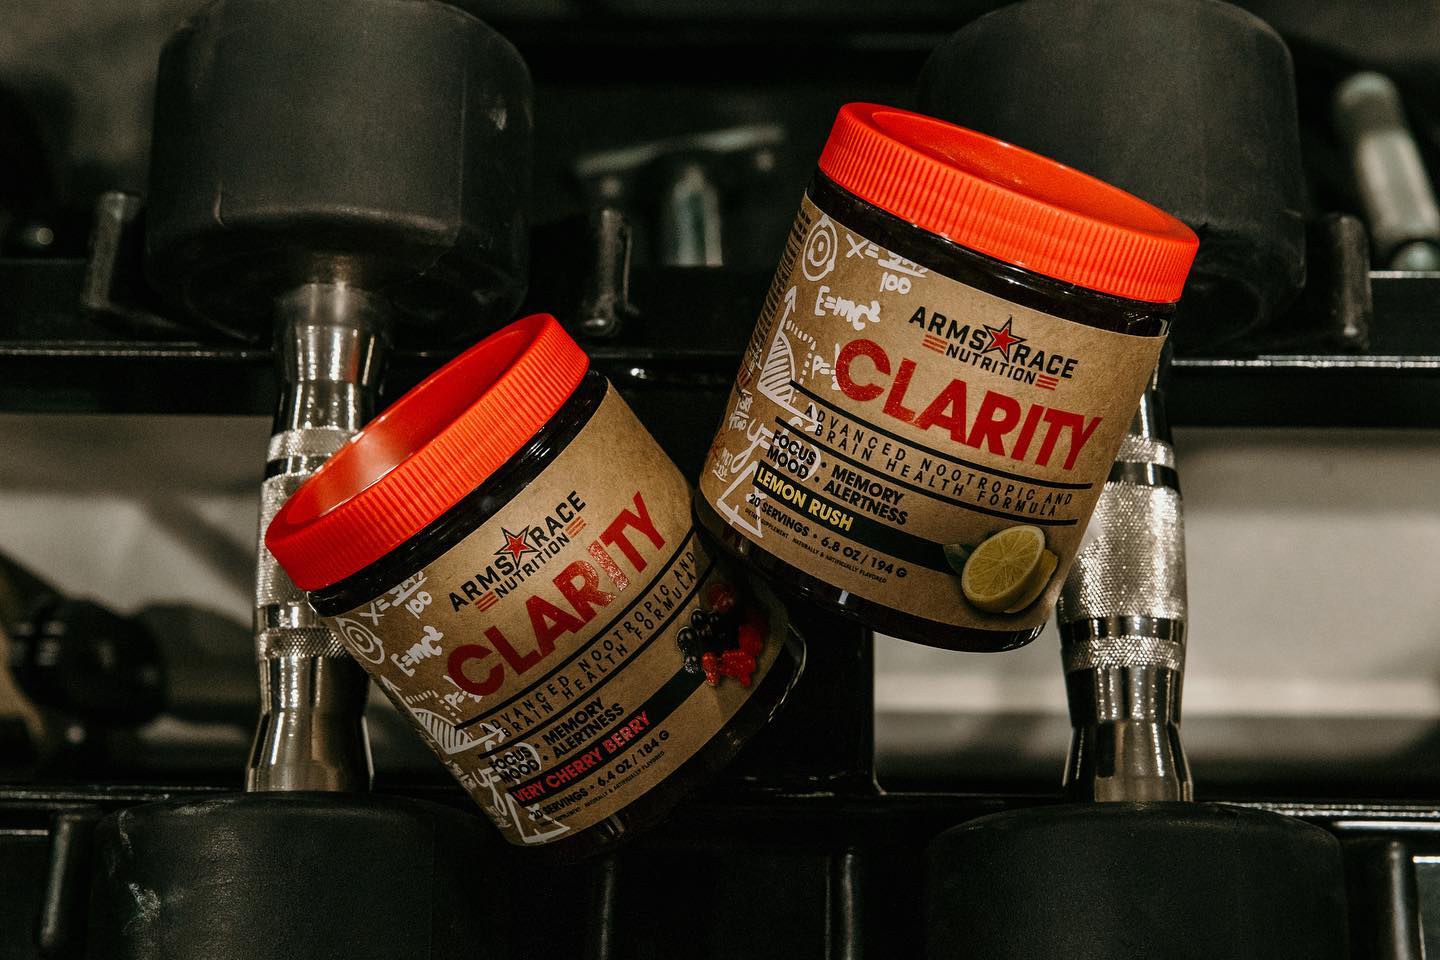 Arms Race Clarity Powder Flavors